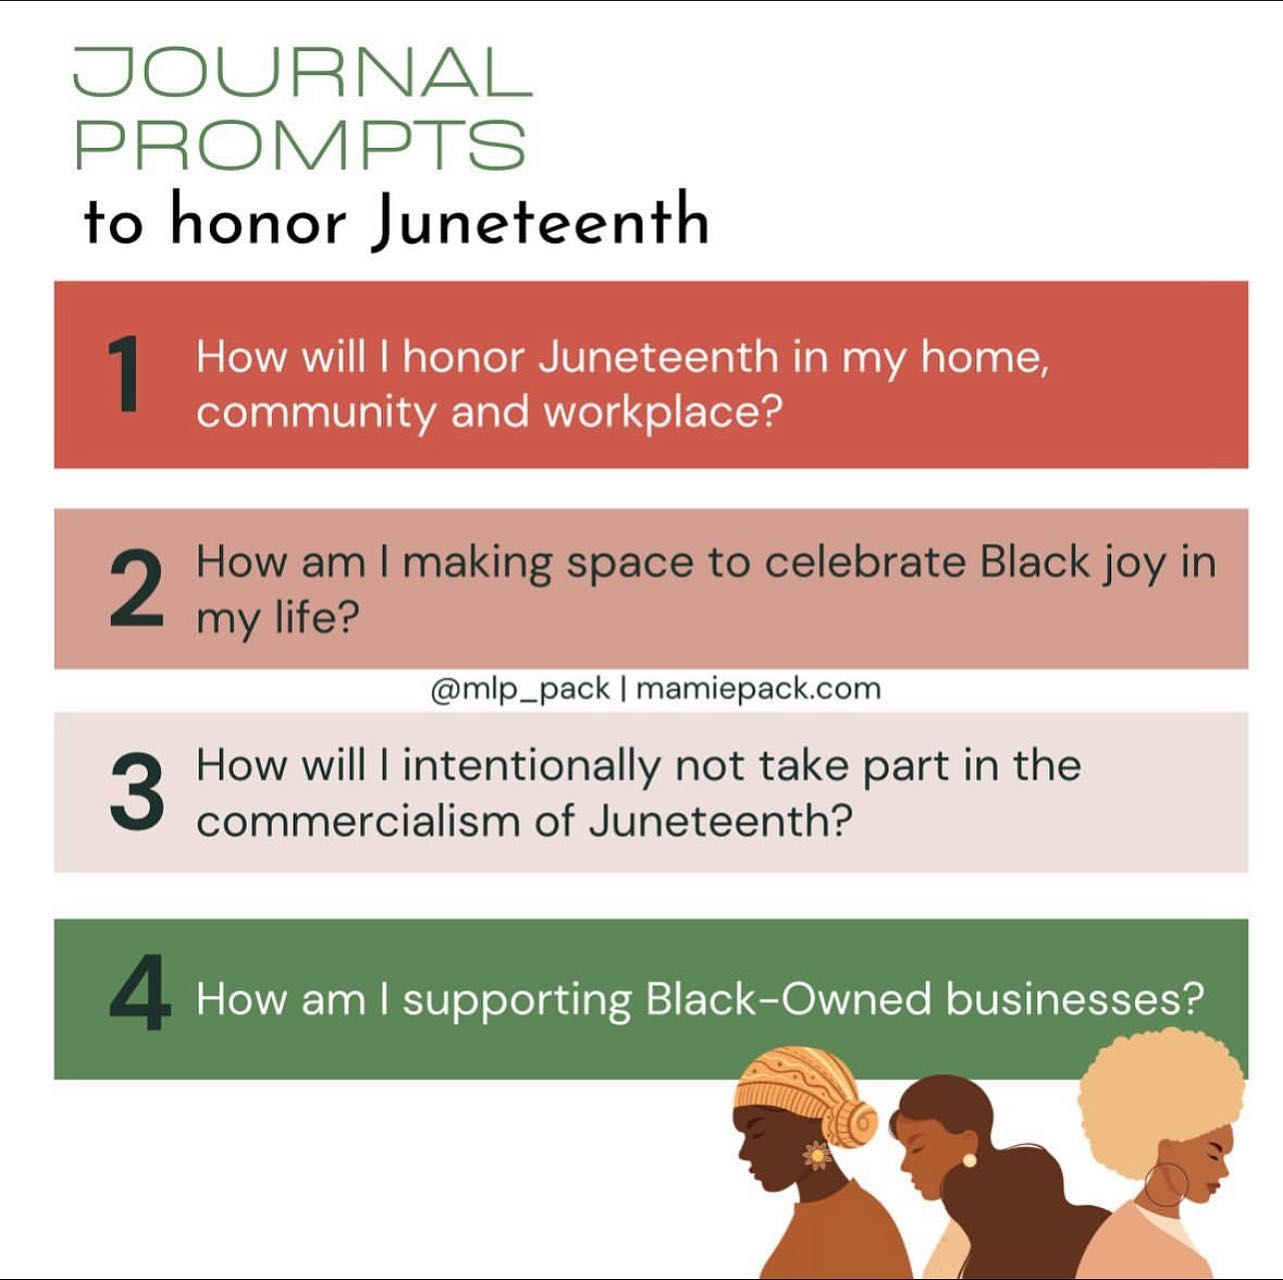 Today is a day of celebration, telling our stories, and living in our Black joy. 

It’s also a day of reflection and making intentional choices to avoid the commercialism of this special day. 
.
.
.
.
.
.
#Juneteenth #juneteenth2022 #mamielpackmedia #amplifyBlackvoices #buyfromablackwoman #supportblackownedbusinesses #diversitymatters #blackentrepreneurs #journalprompts #journalquestions #blackvoices #blackvoicesmatter #blackjoy #blackjoymatters #happyjuneteenth #blackwomenentrepreneurs #blackgirljoy #blackwomenbloggers #blackwomenentrepreneur #journalingideas #creativejournaling #stylishstationery #blackcreatives